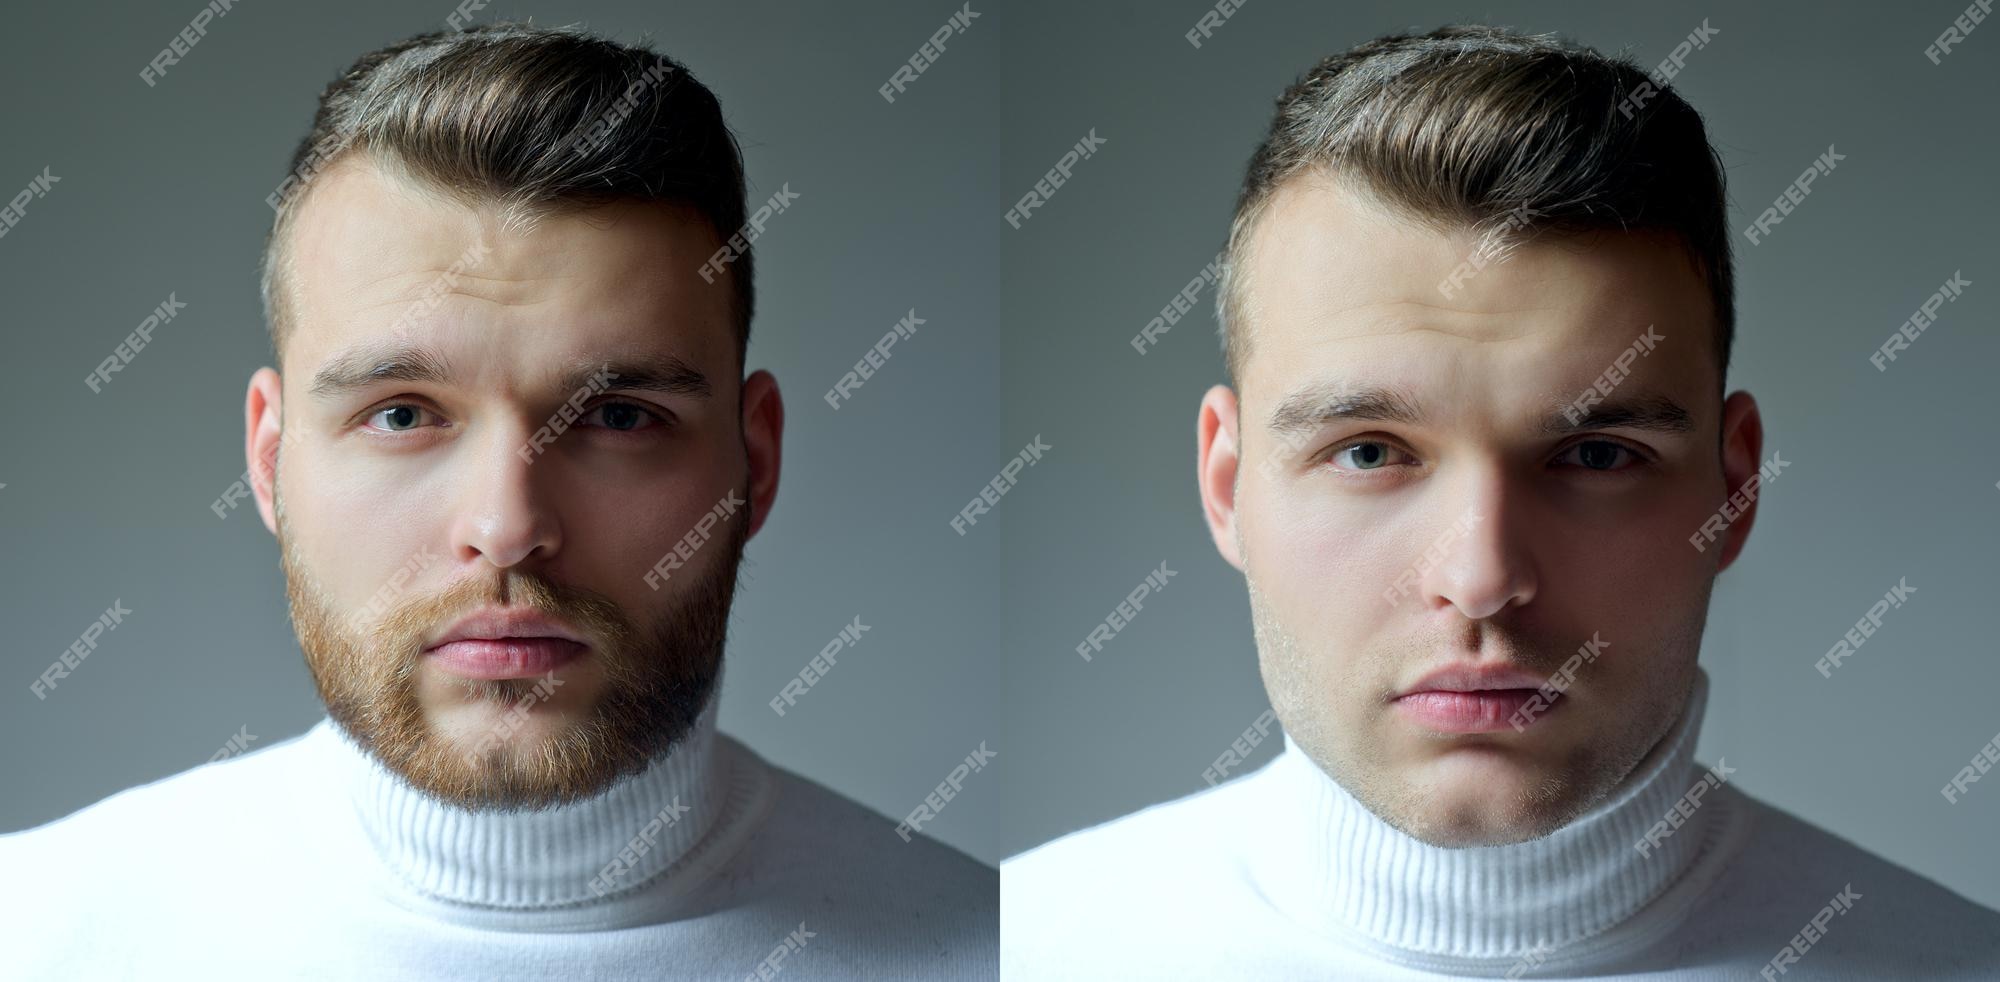 Premium Photo | Set of beard man hair style hair stylist for handsome man  barber shop set after or before shaven